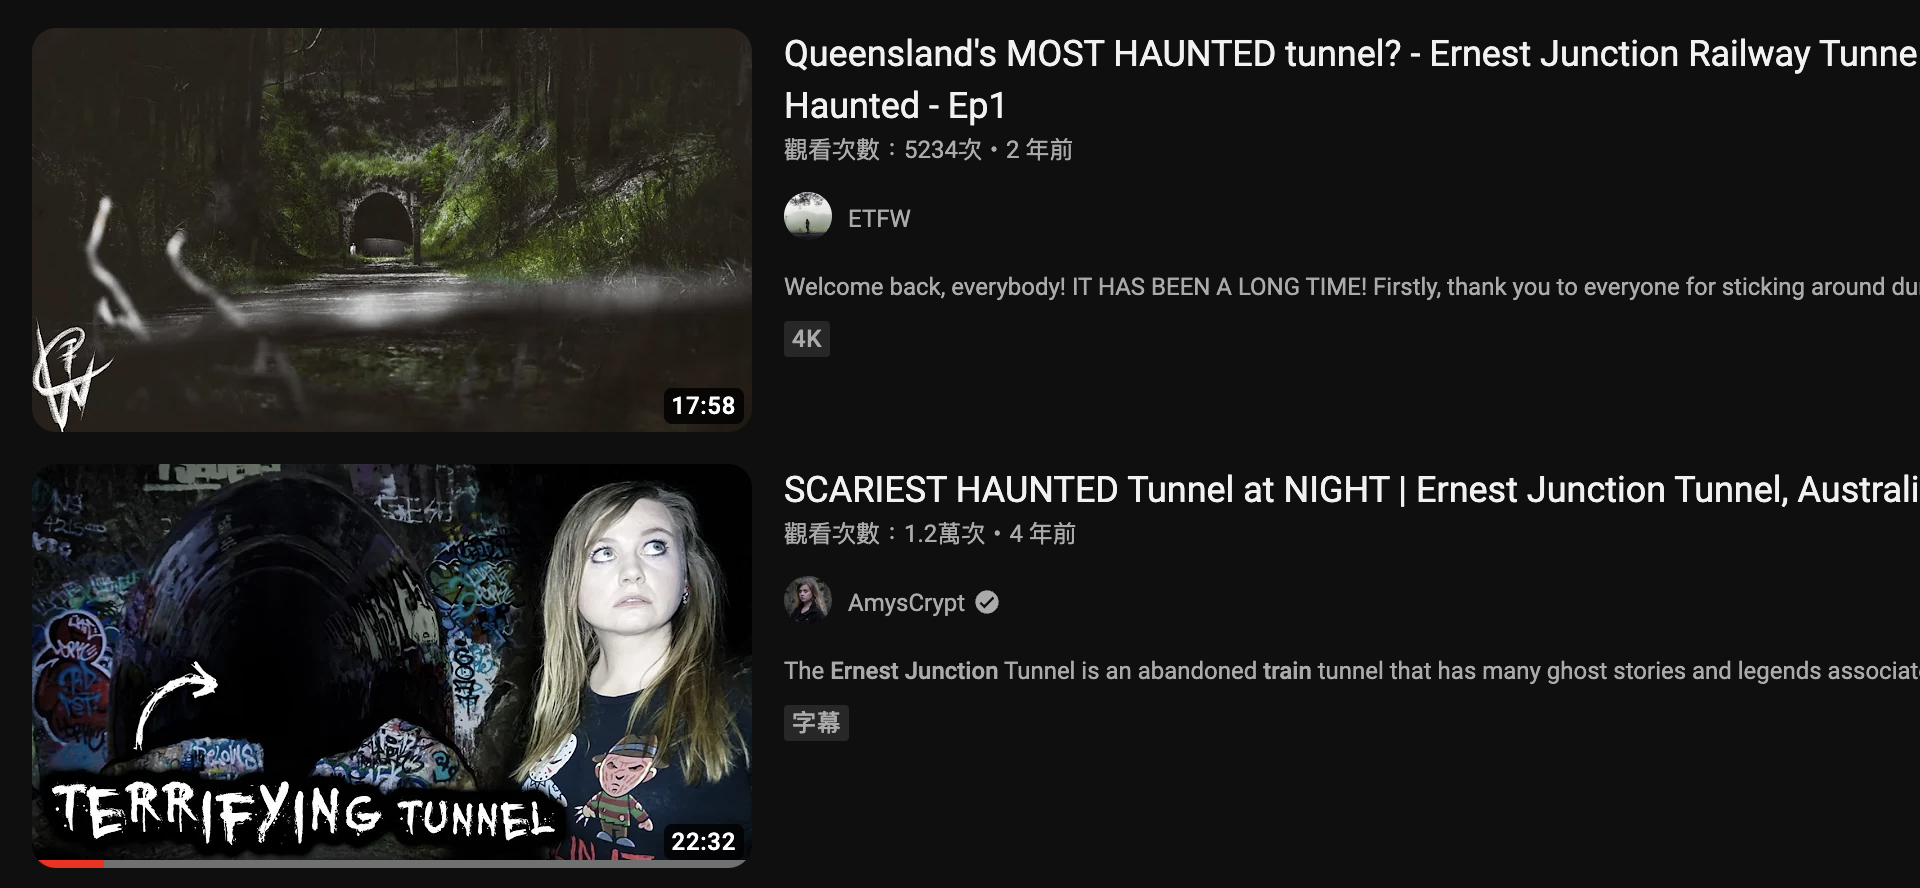 Queensland's most haunted tunnel - Ernest Junction Tunnel on youtube